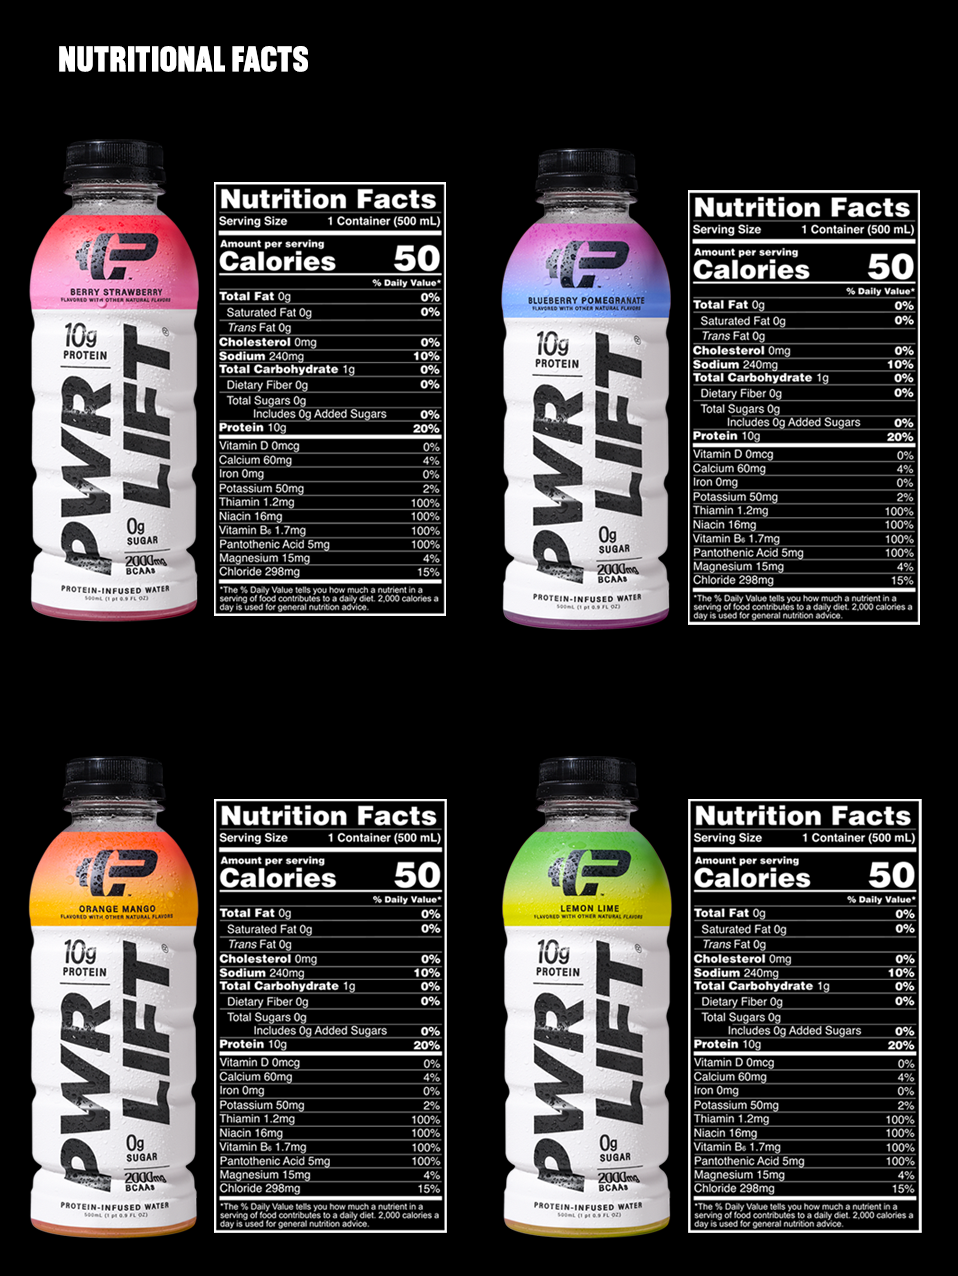 Nutritional facts tables for each of the 4 flavors of PWR LIFT in a 2x2 grid layout